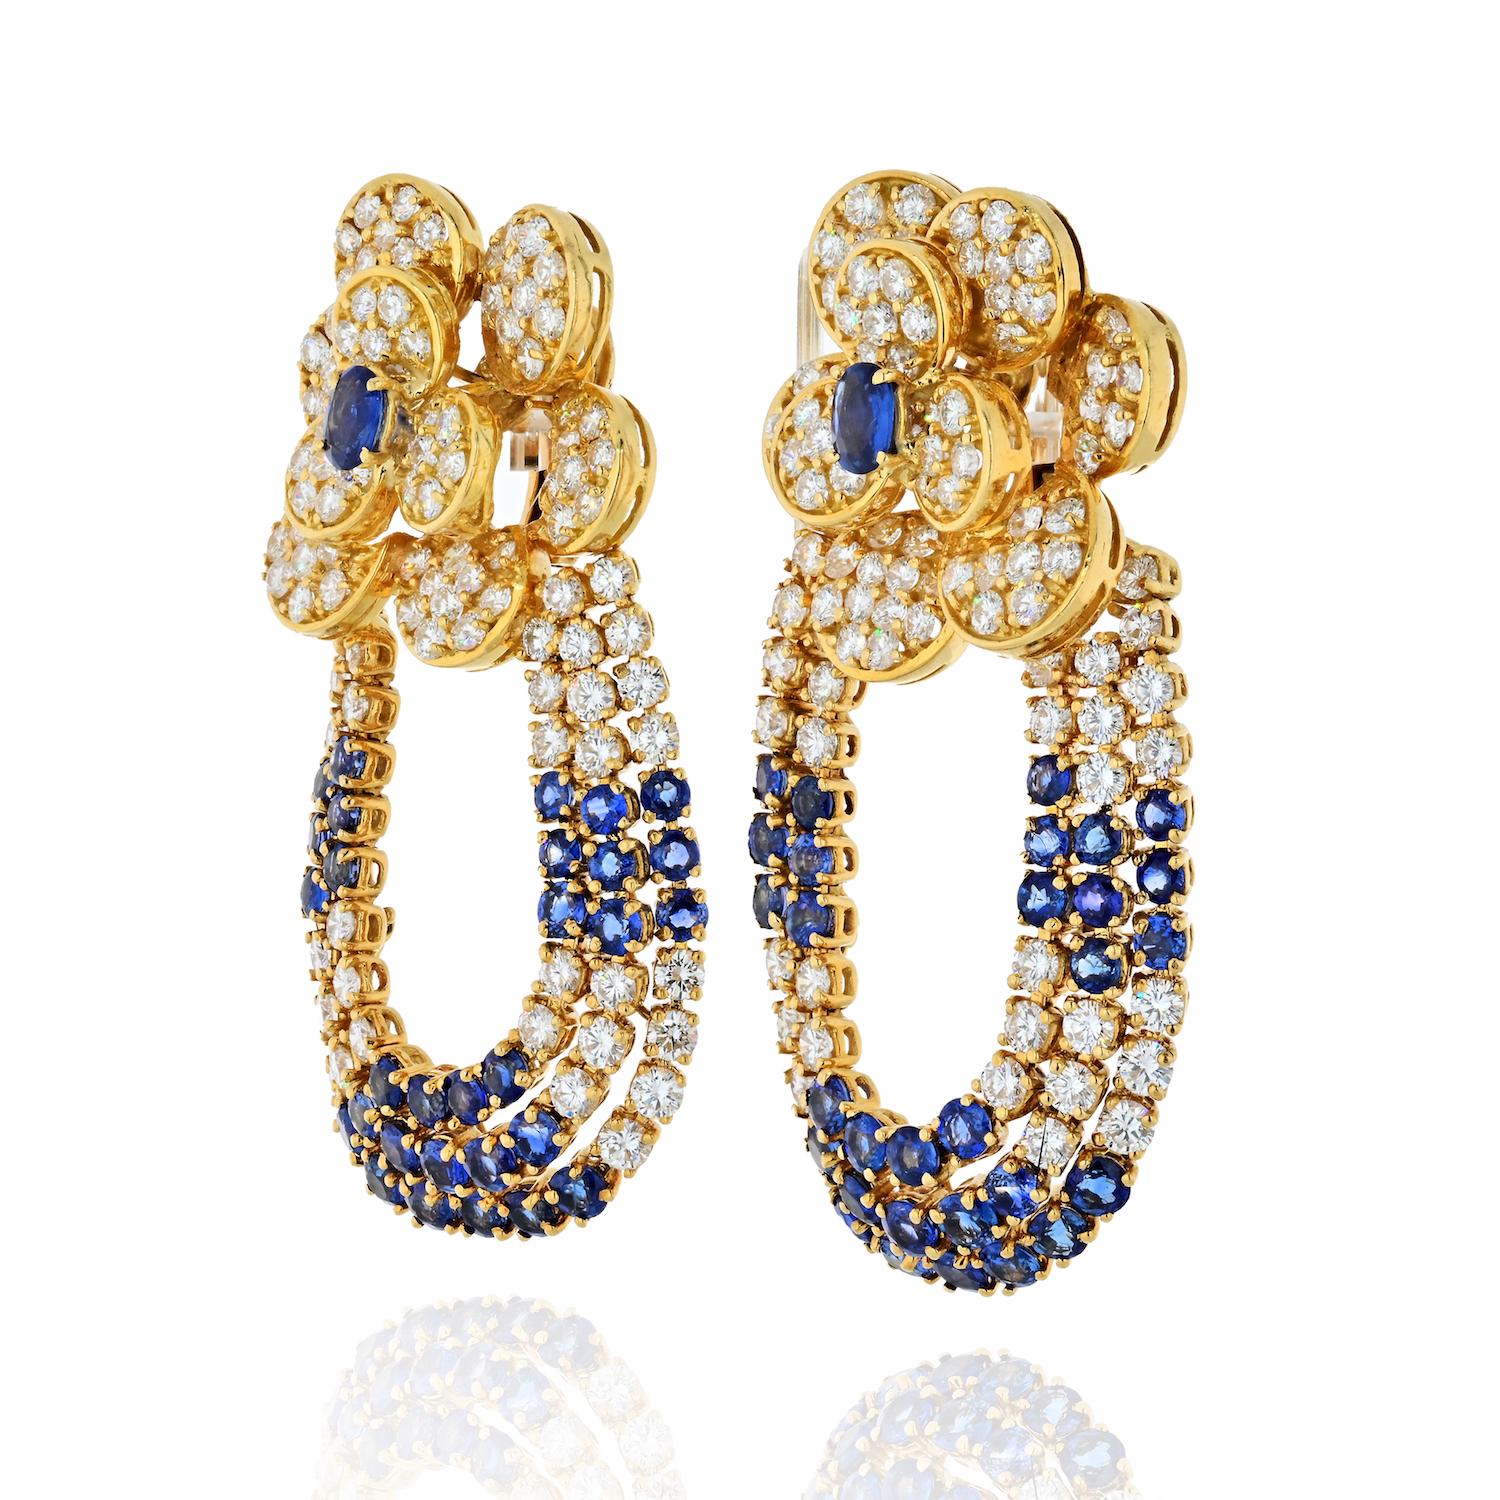 Make a strong impression wearing these large sapphire and diamond flower top earrings. Crafted in 18K yellow gold featuring blue sapphires and round diamonds these earrings are for someone who is comfortable with being the center of attention.